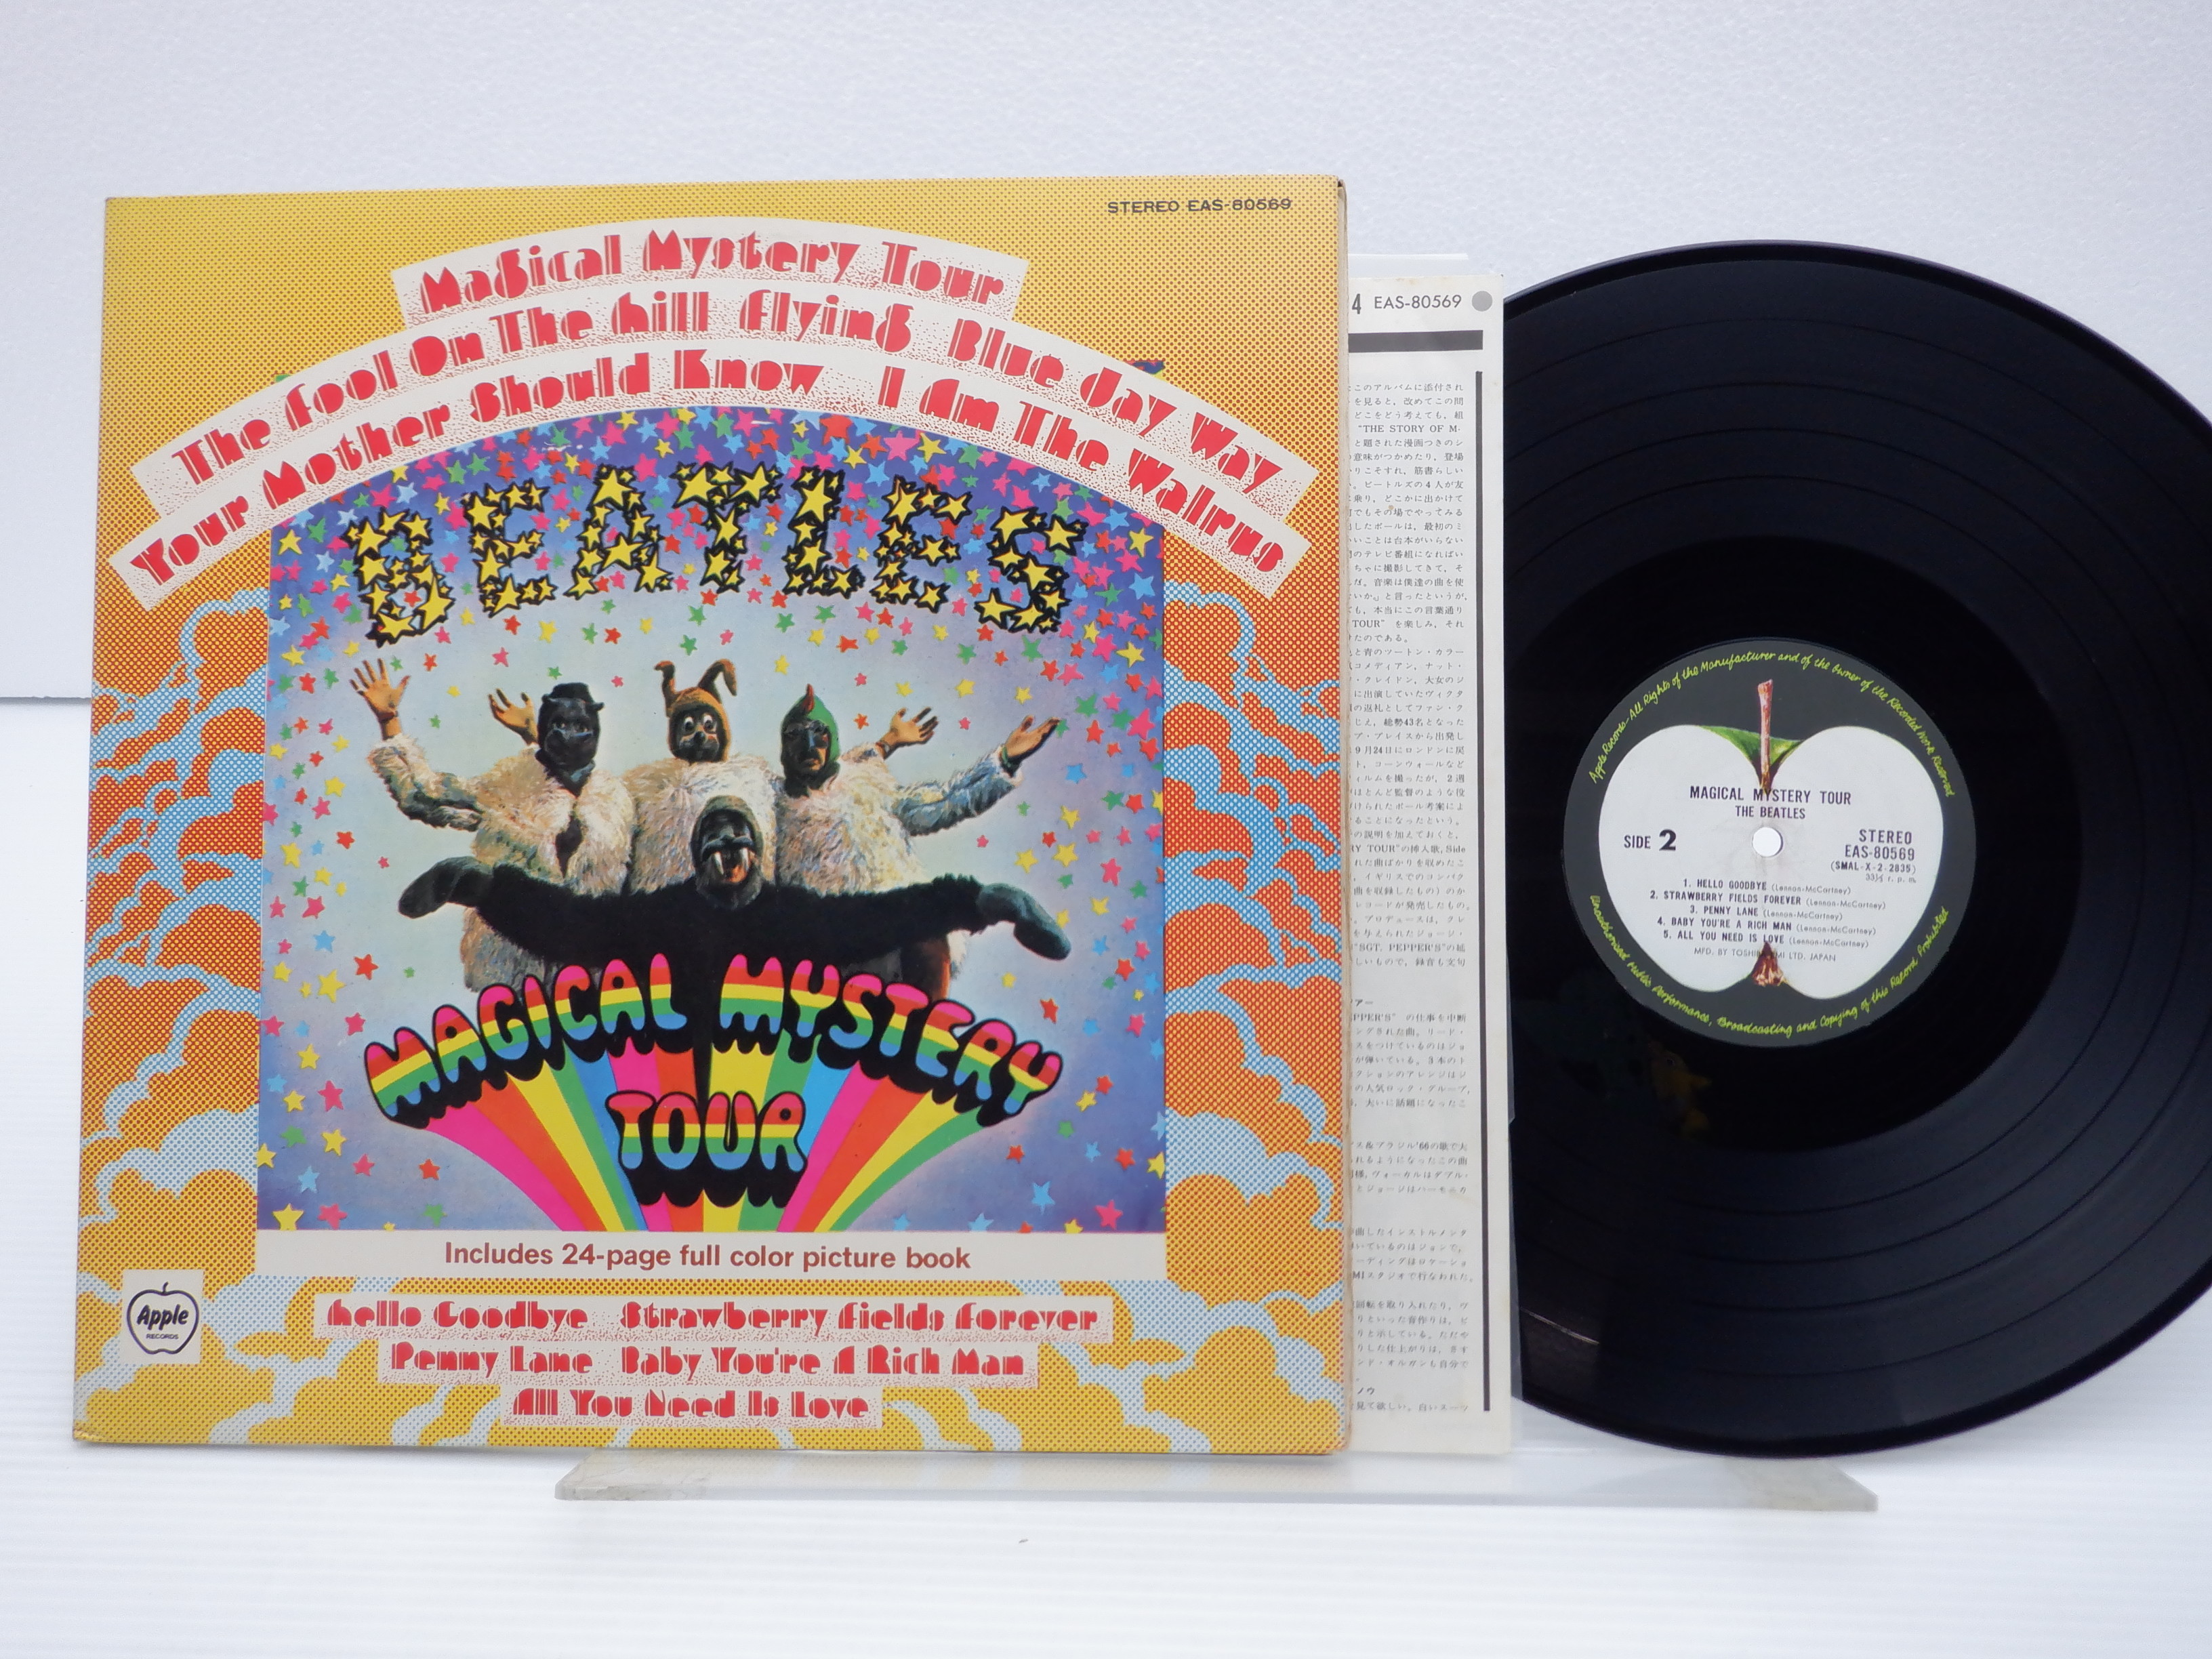 ☆EP盤 2枚組 THE BEATLES ザ・ビートルズ【MACICAL MYSTERY TOUR 